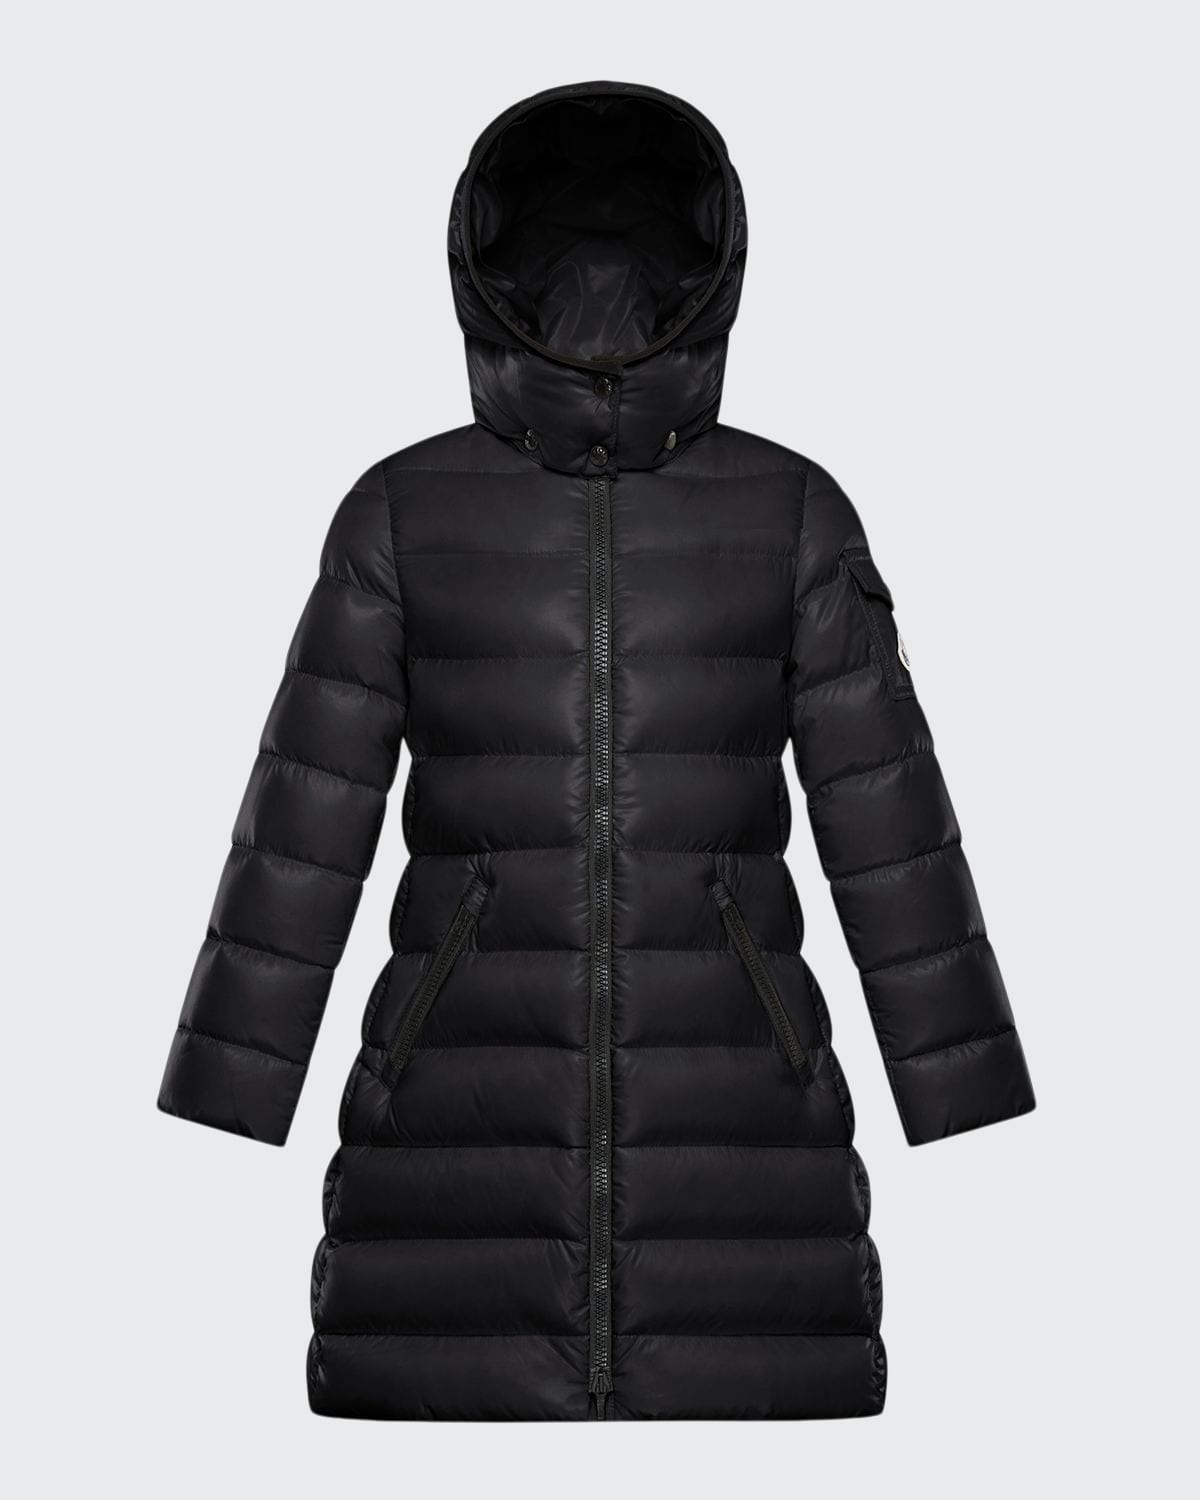 MONCLER GIRL'S MOKA QUILTED LONG JACKET